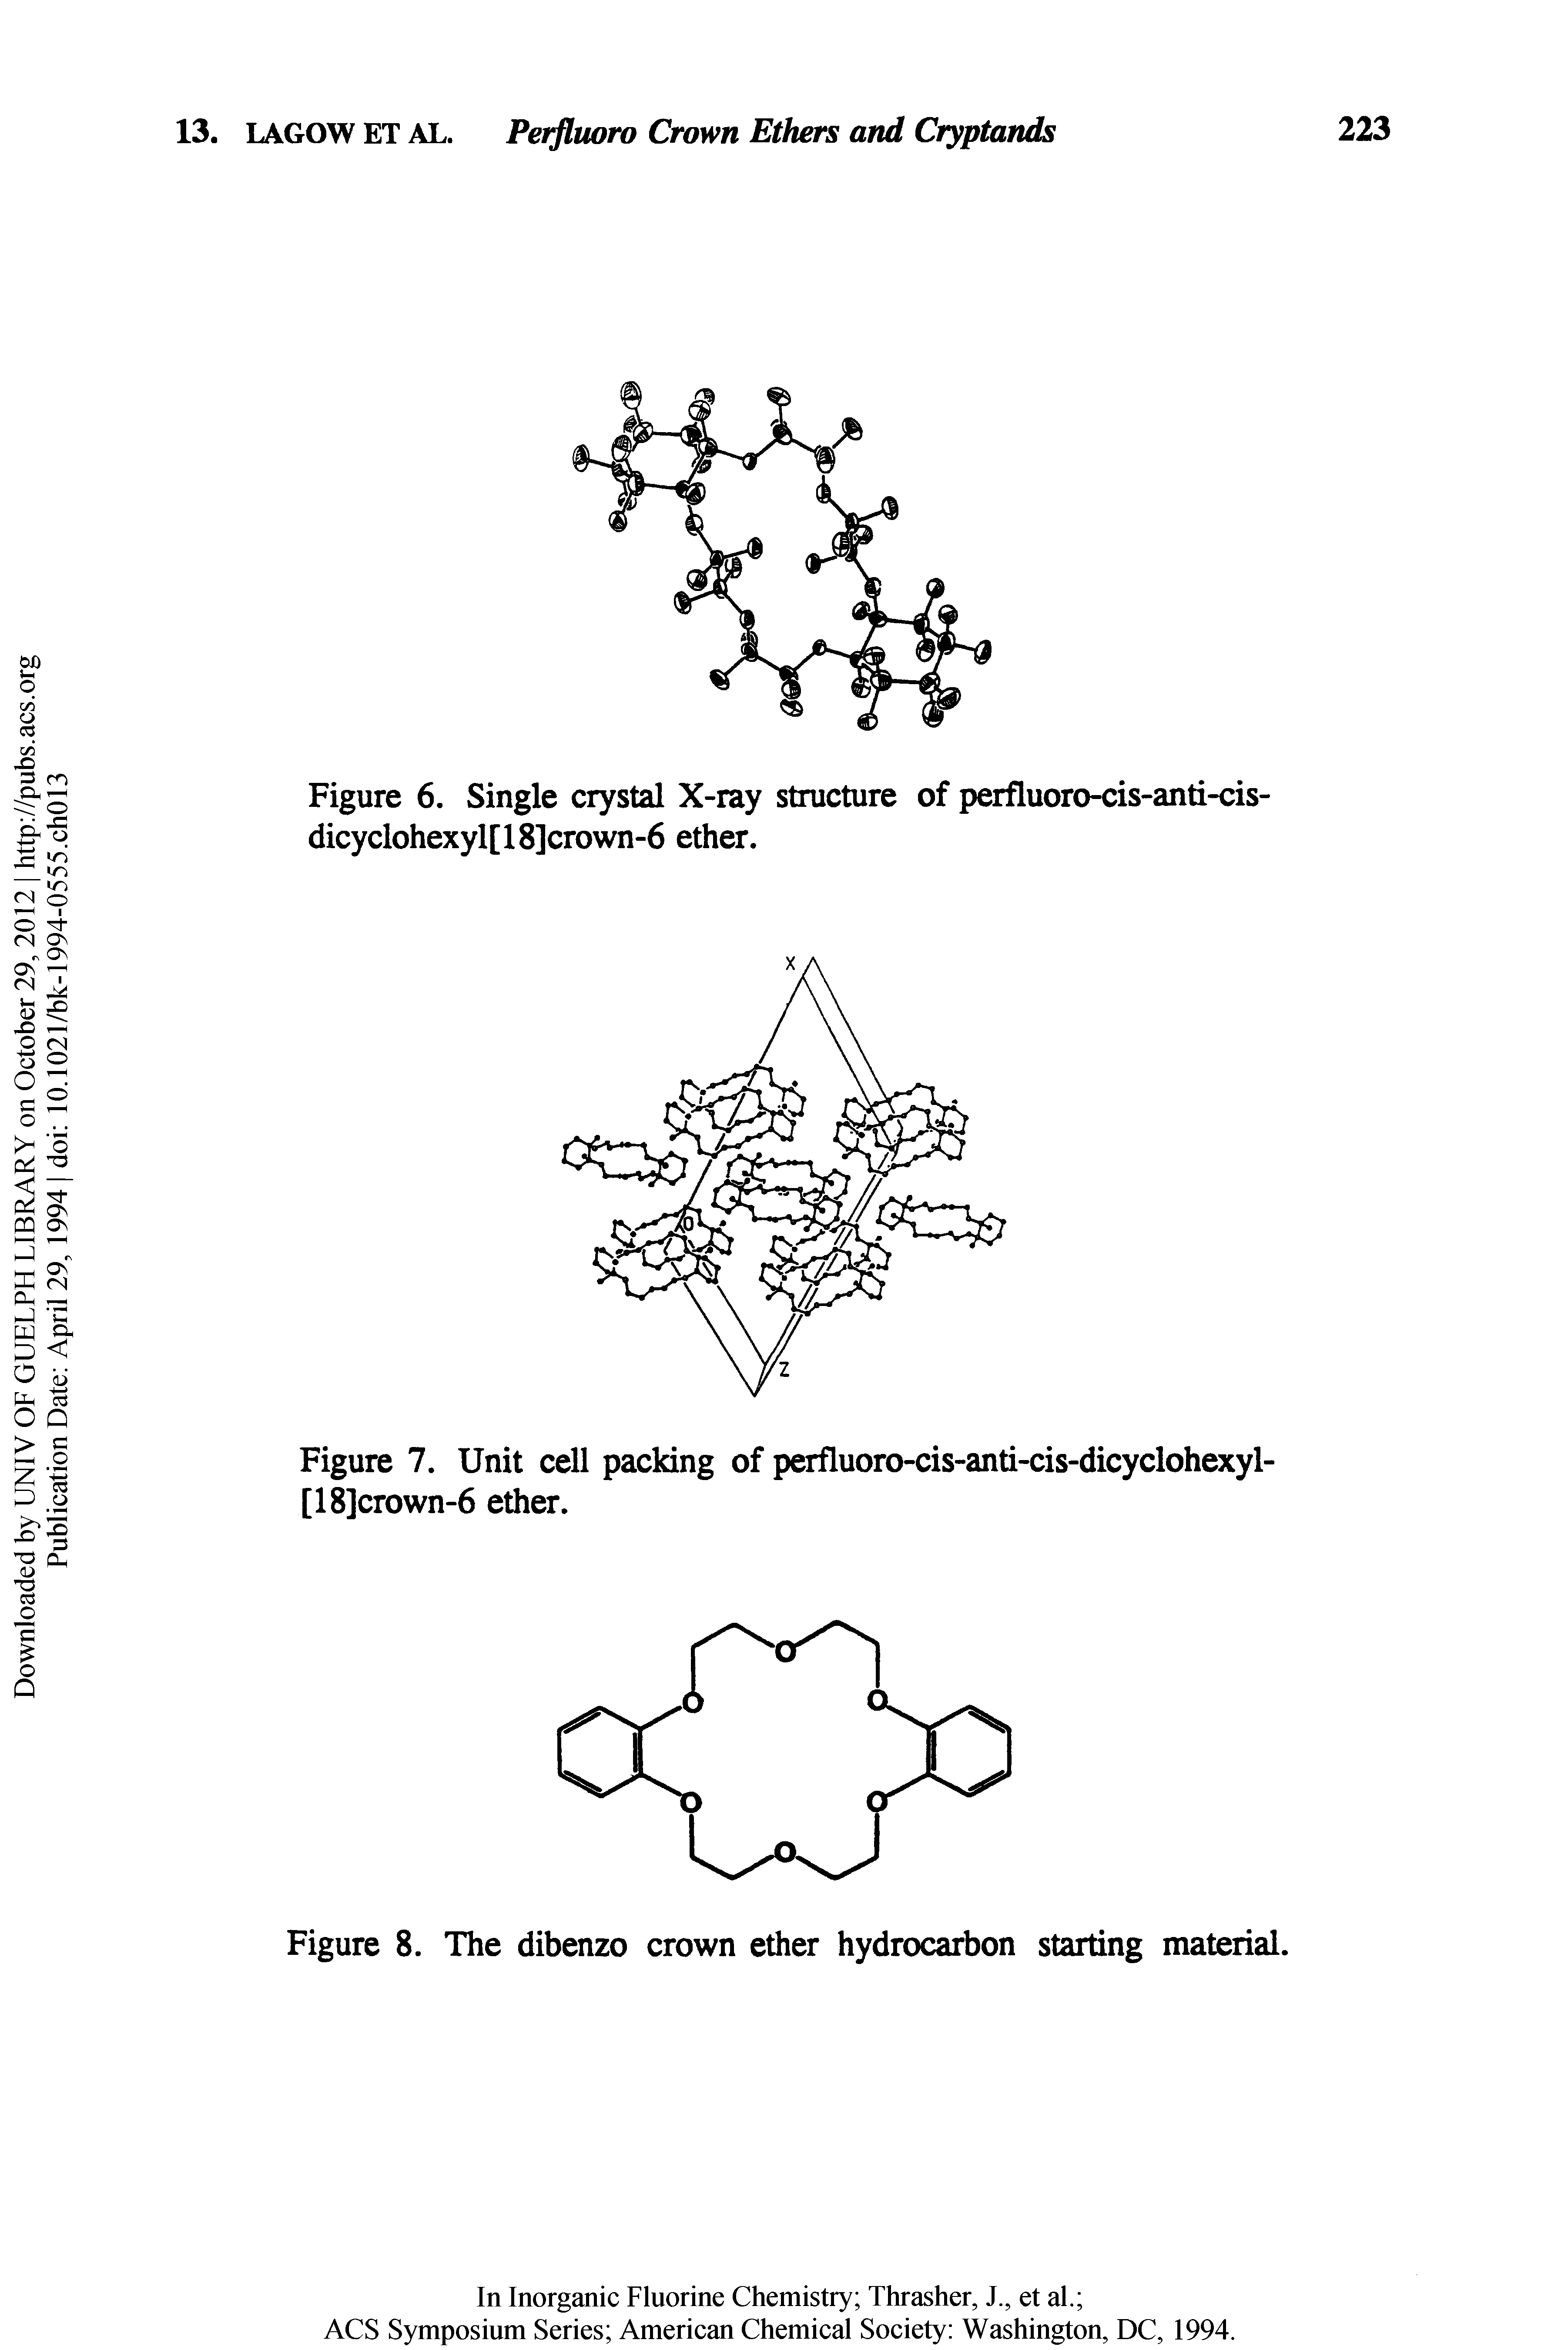 Figure 8. The dibenzo crown ether hydrocarbon starting material.